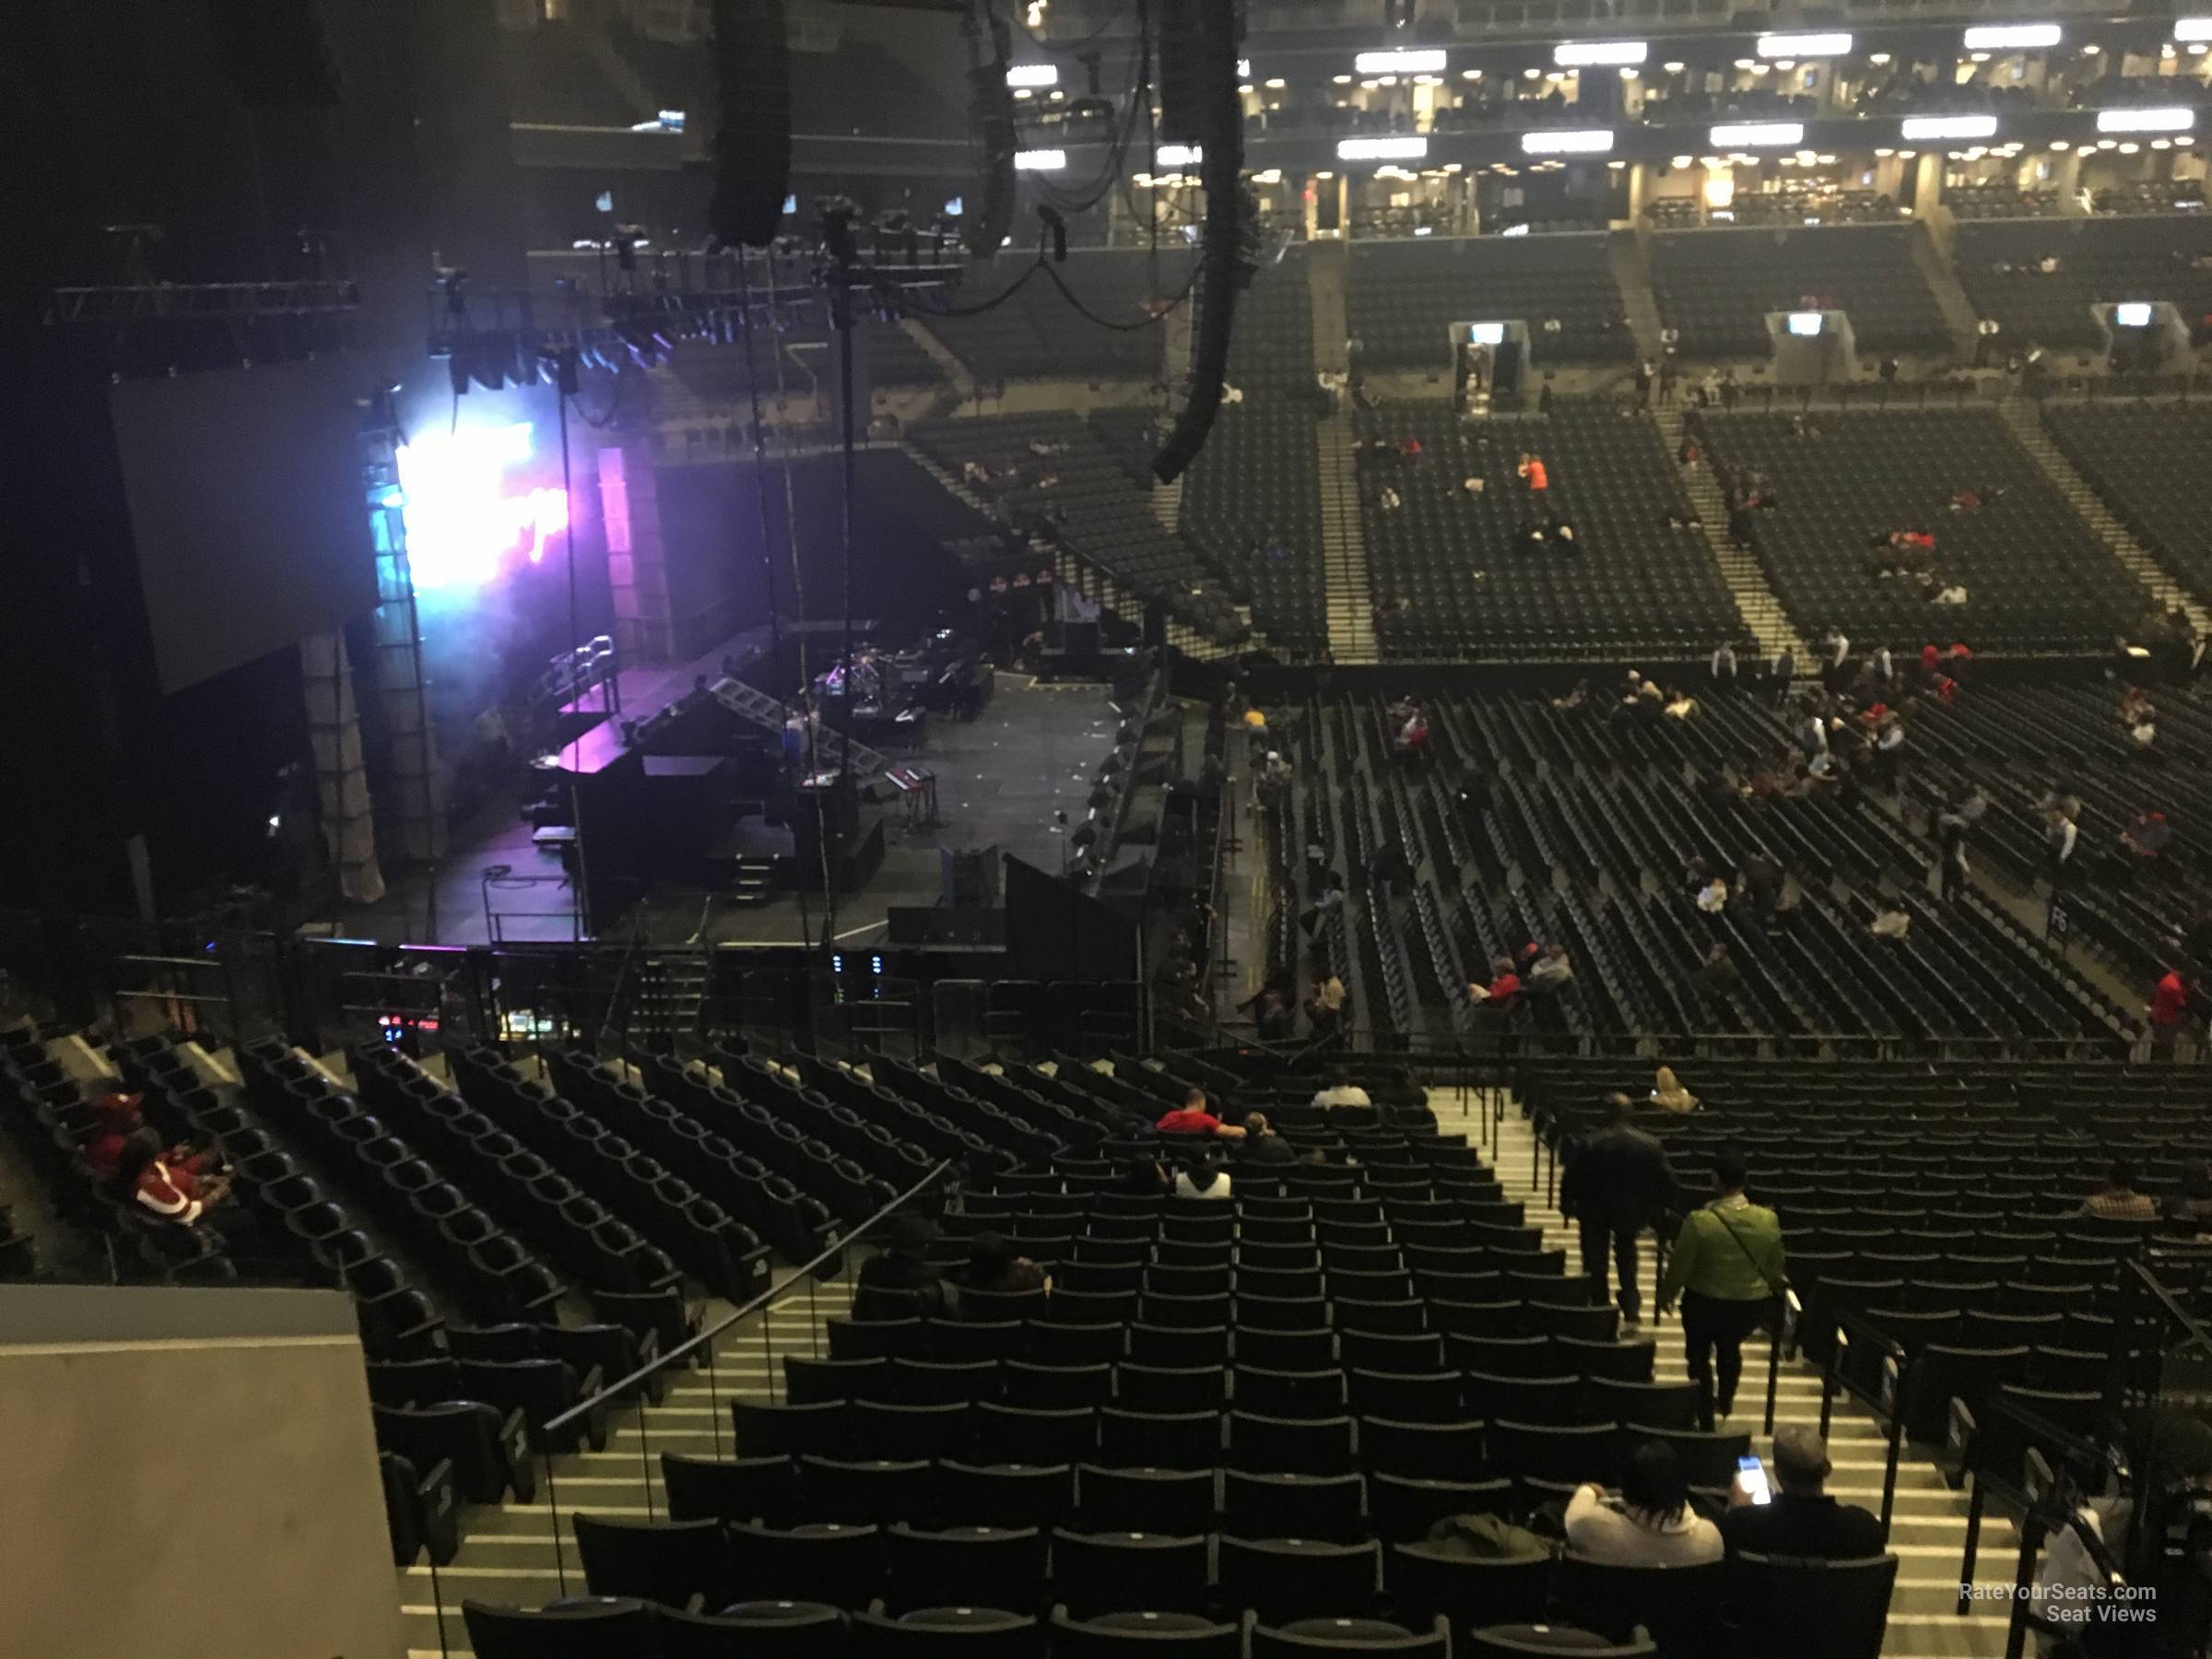 section 126, row 6 seat view  for concert - barclays center